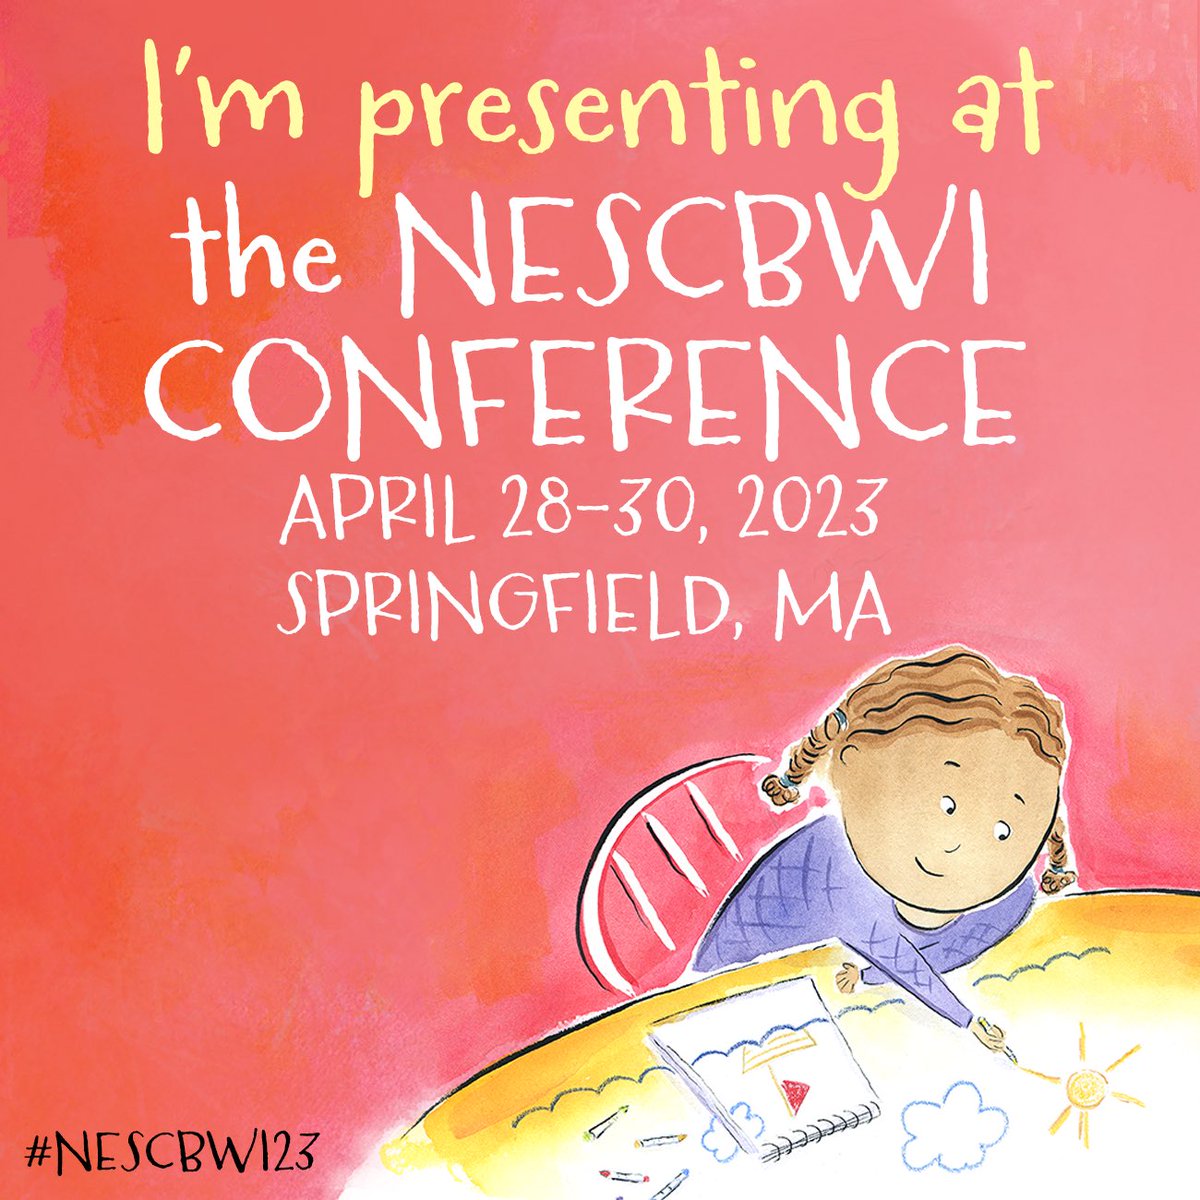 Last time #nescbwi was live I was pre-published. Now I’m presenting!!! Hope to see you there!